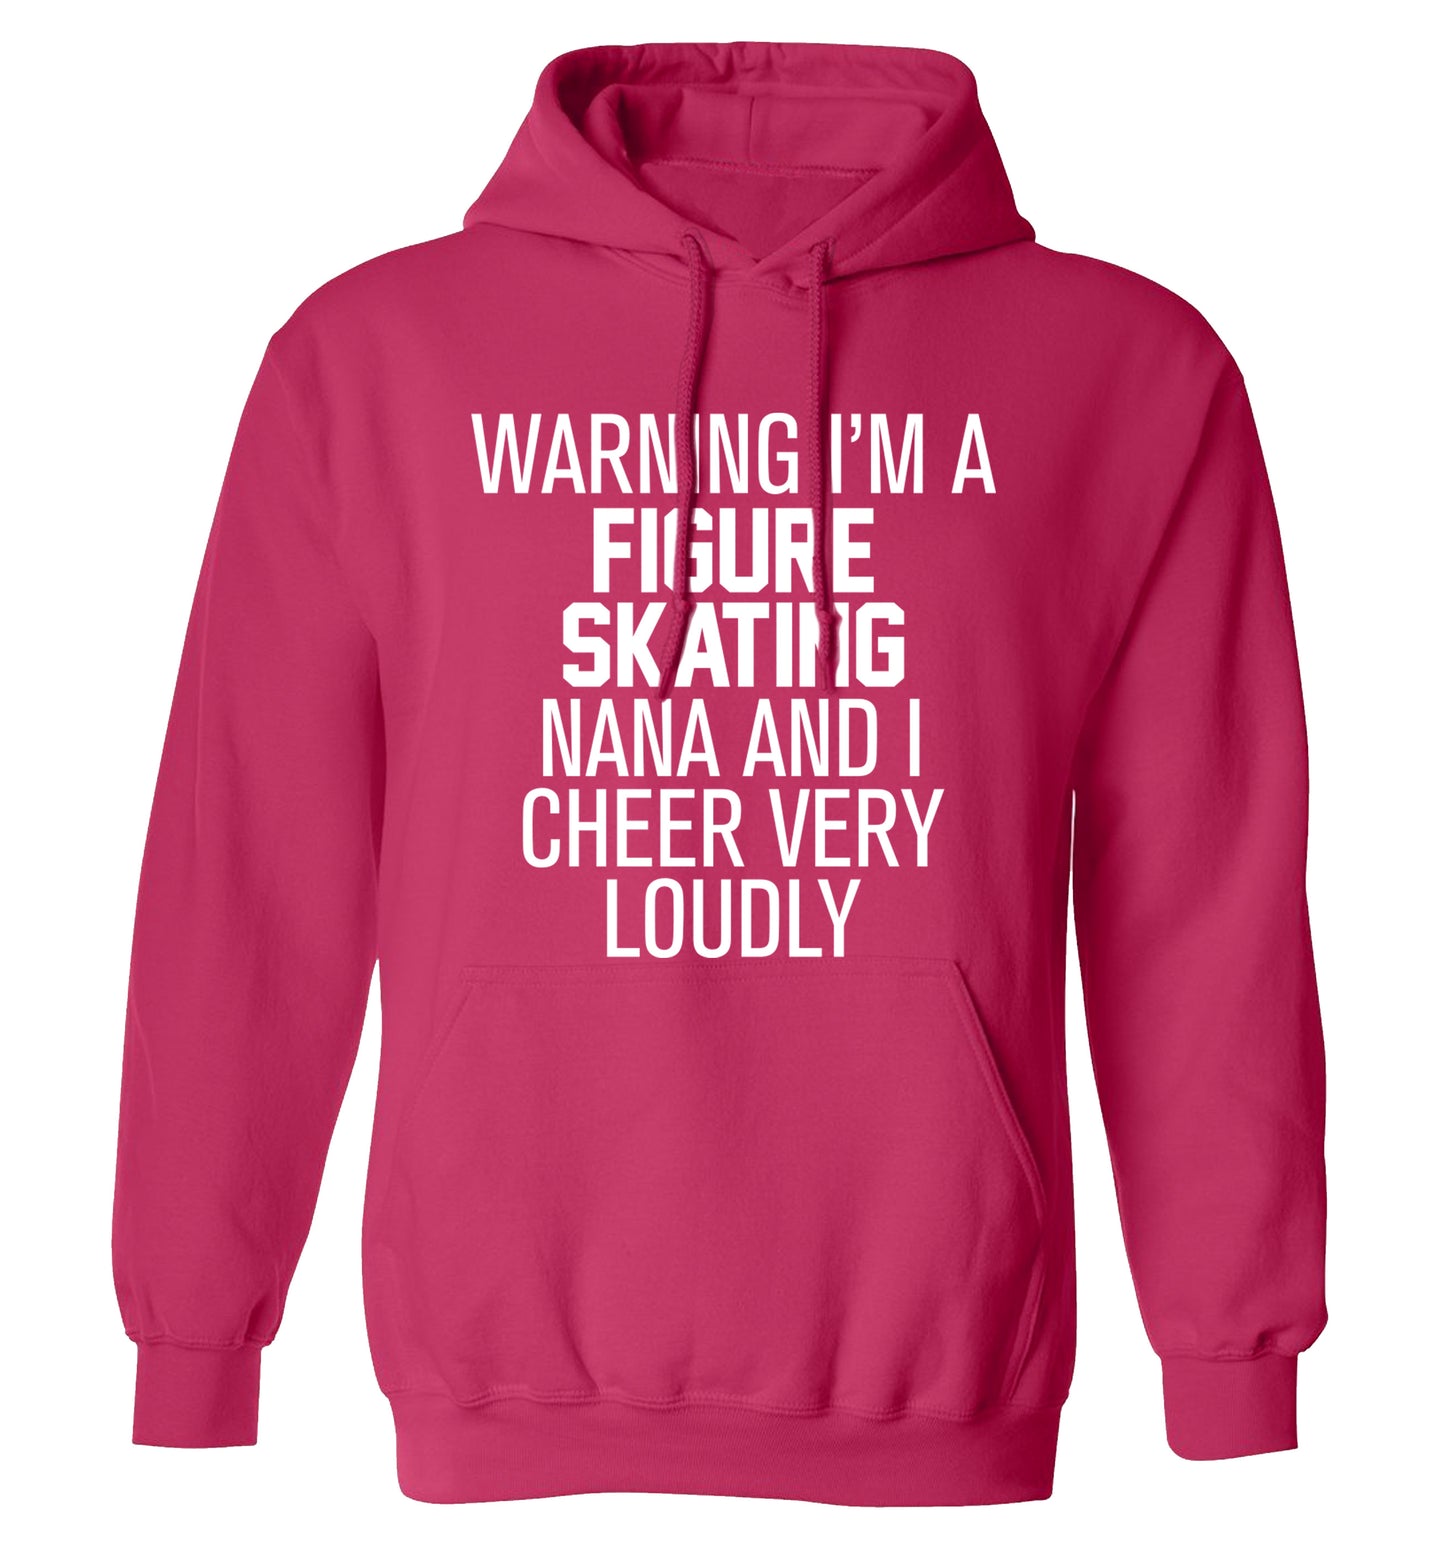 Warning I'm a figure skating nana and I cheer very loudly adults unisexpink hoodie 2XL